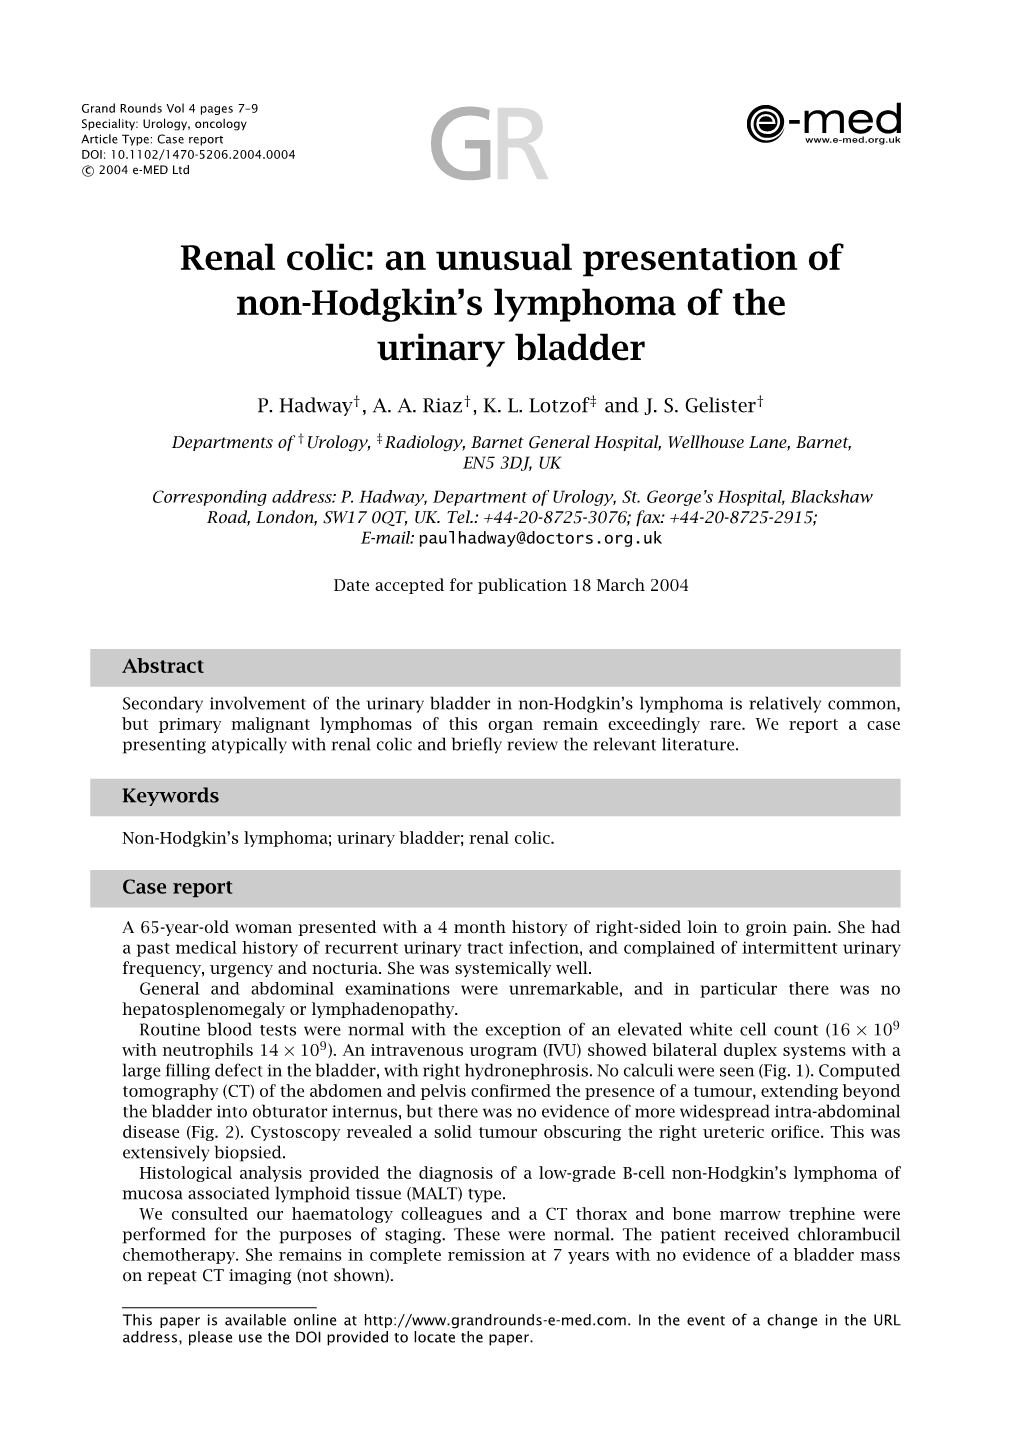 Renal Colic: an Unusual Presentation of Non-Hodgkin's Lymphoma of The